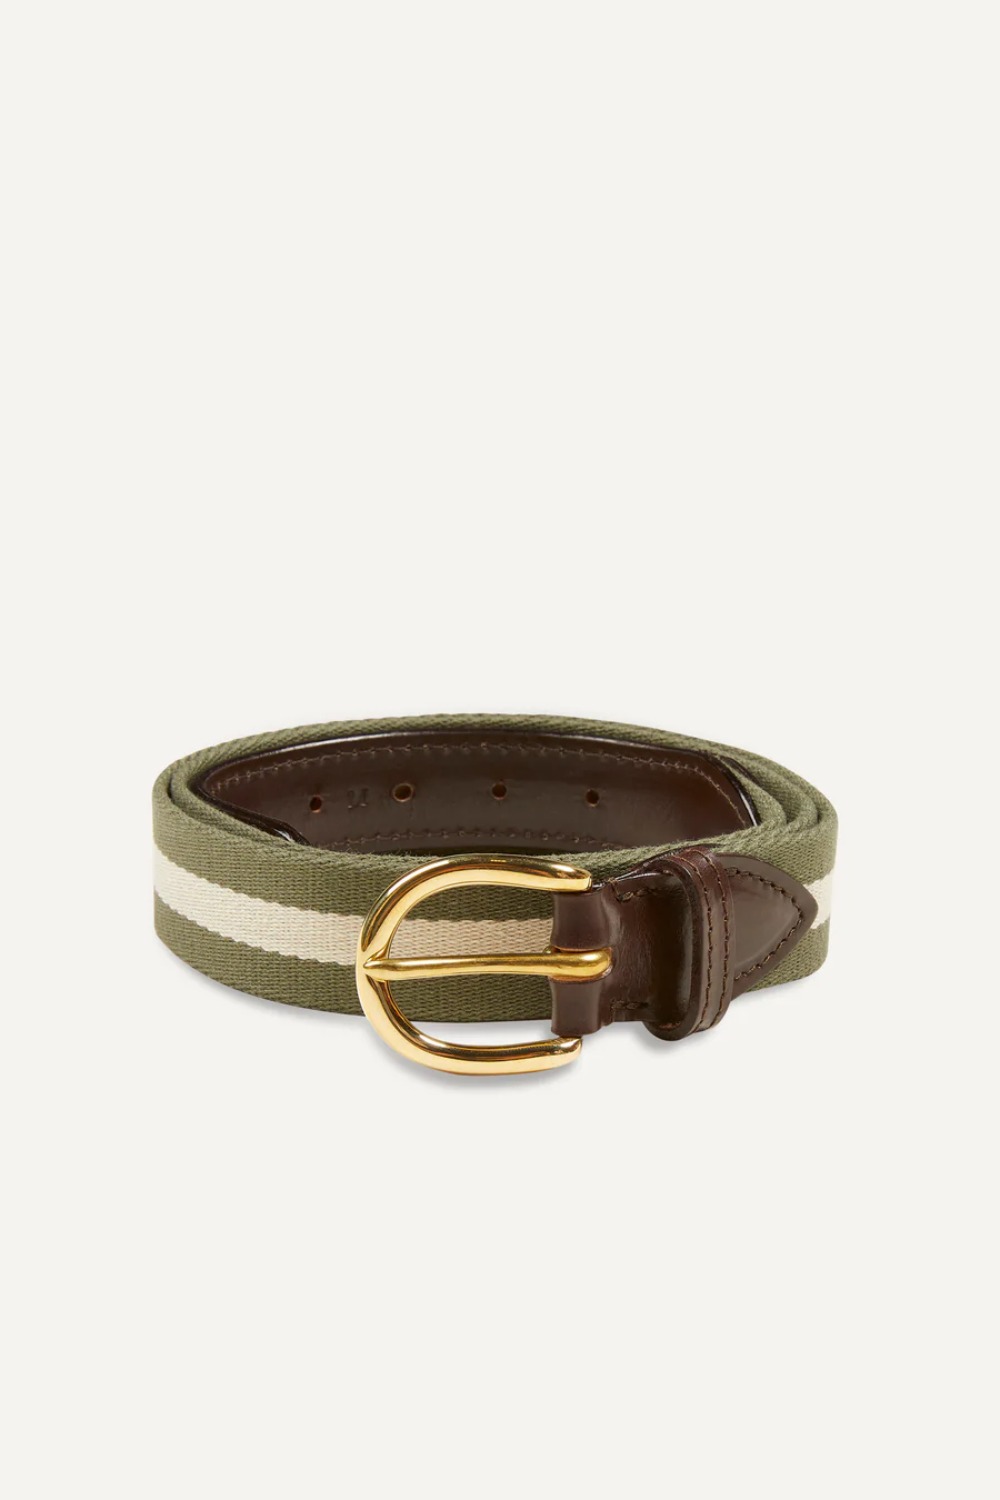 OLIVE AND ECRU STRIPE WEBBING AND LEATHER BELT WITH BRASS BUCKLE